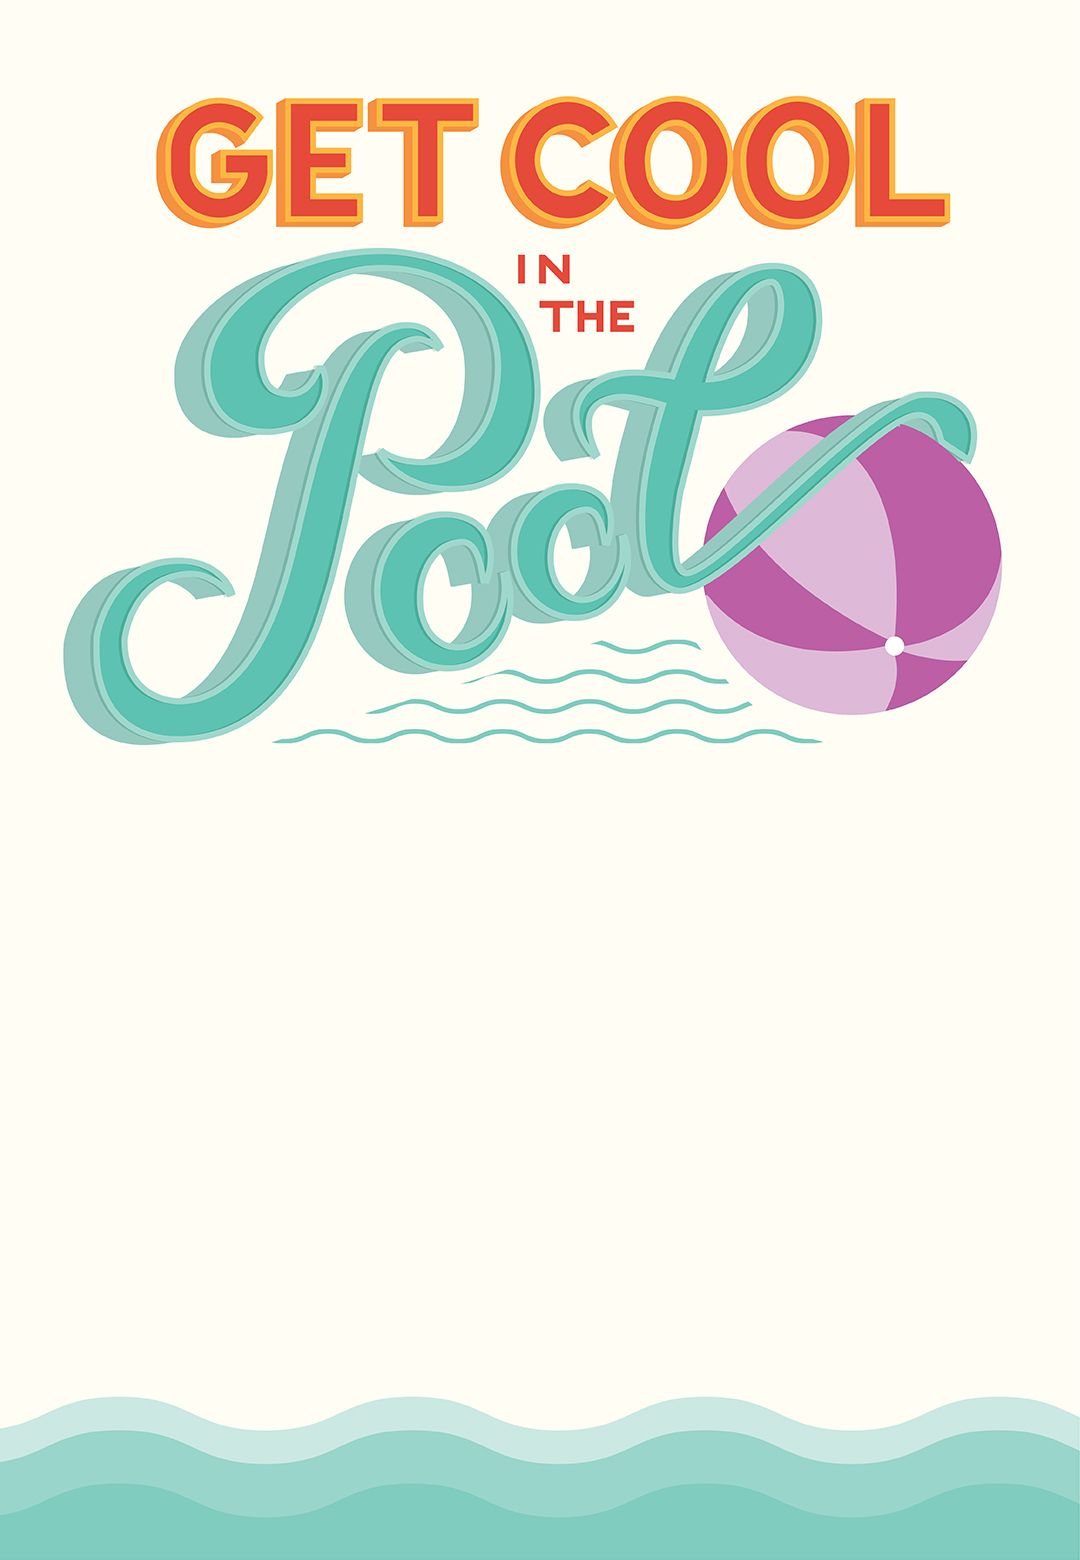 Pool Party - Free Printable Party Invitation Template | Greetings - Free Printable Pool Party Invitations